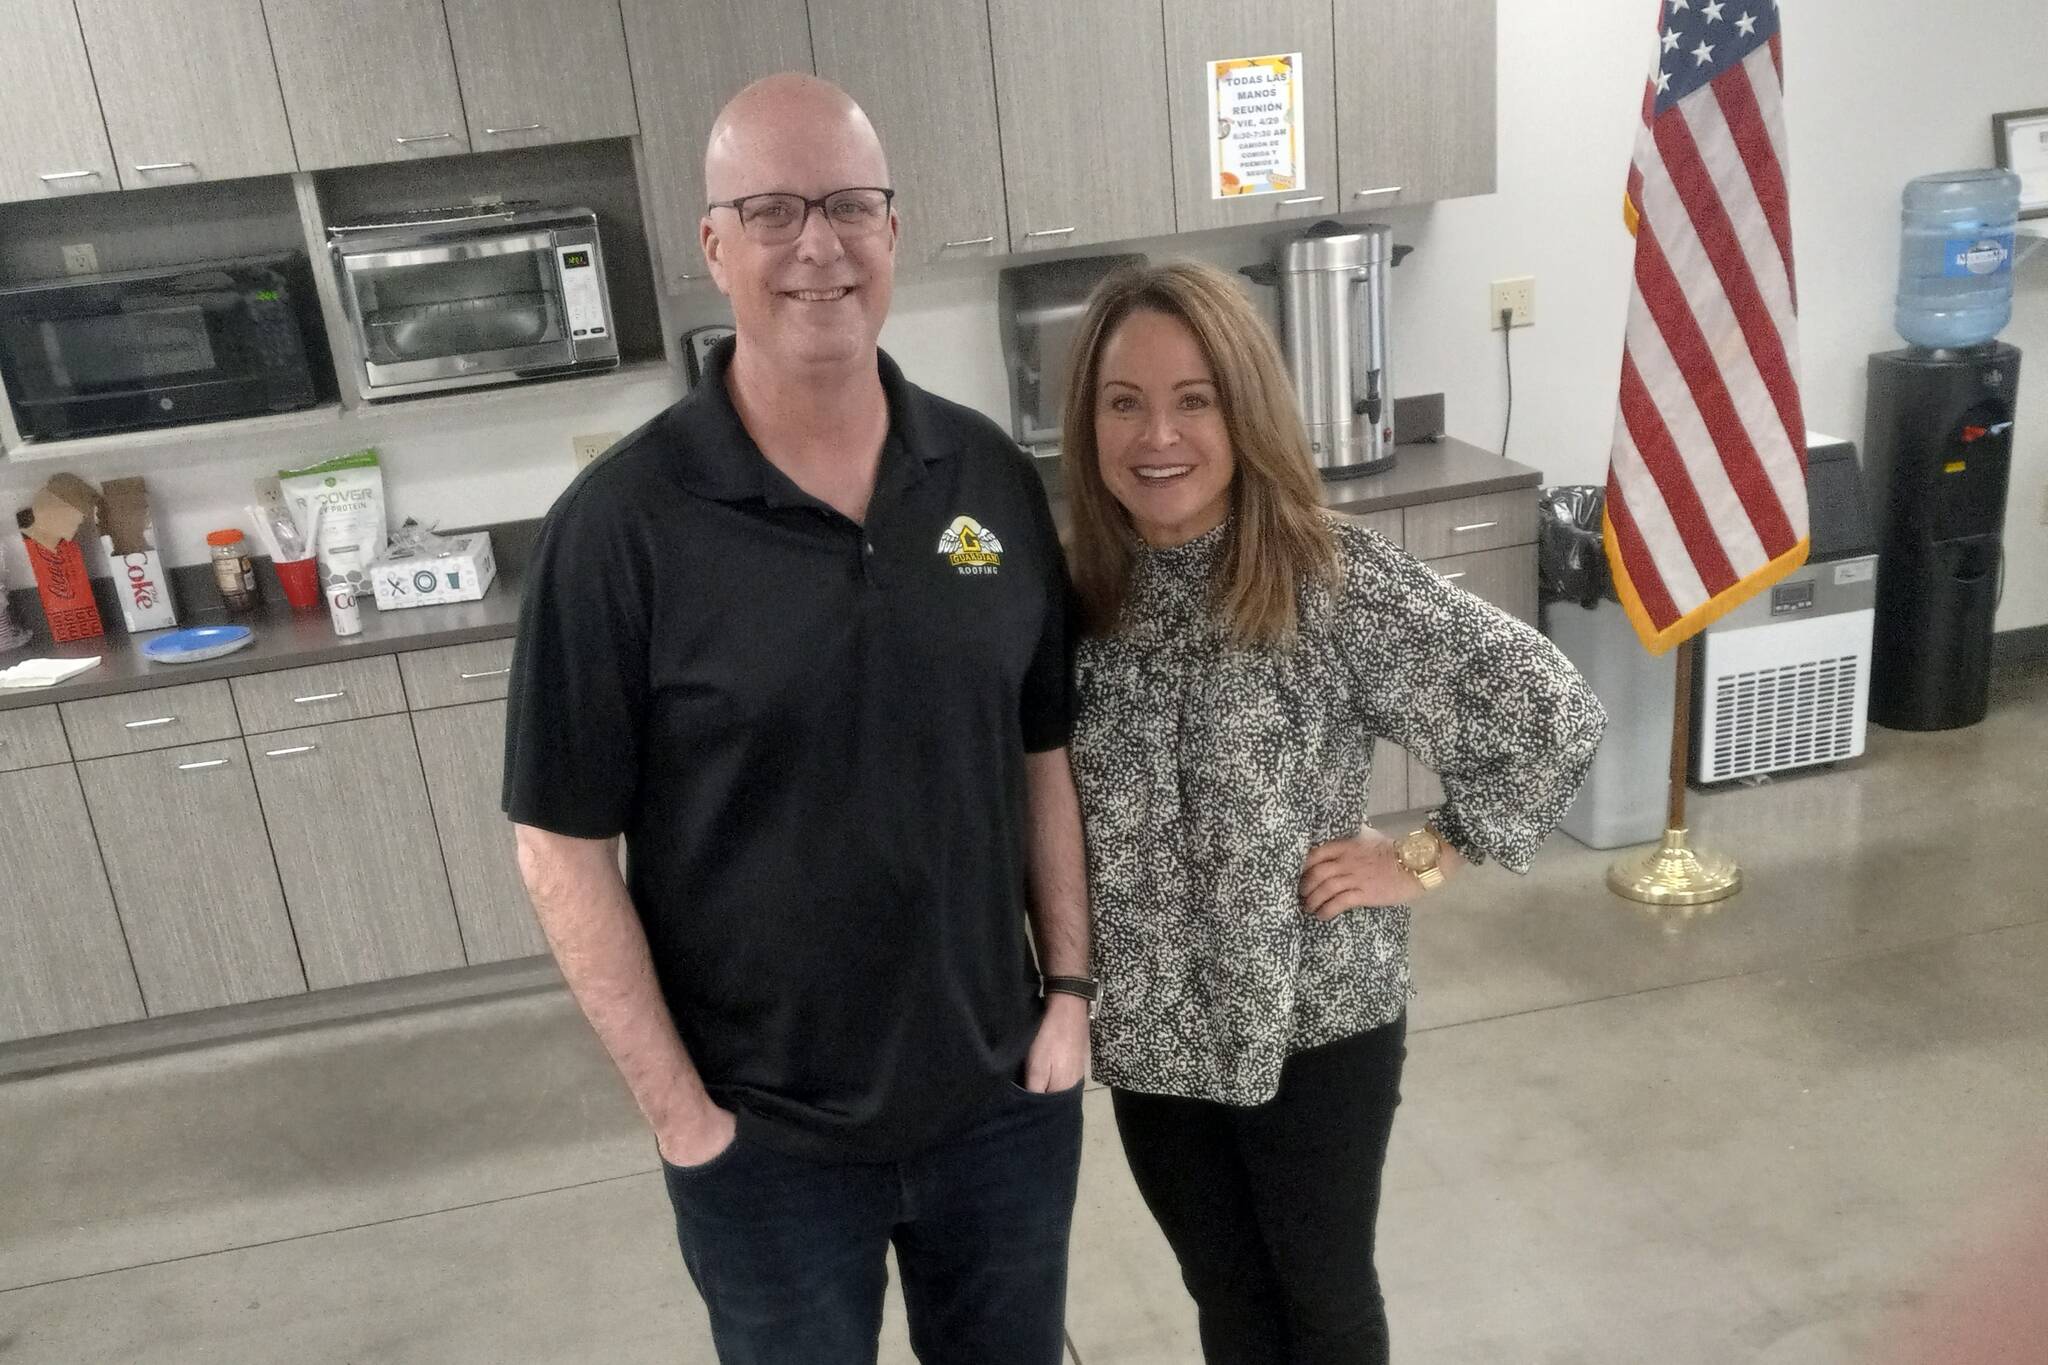 Matt and Lori Swanson have brought their business, Guardian Roofing, a long way from its founding in 2005, adding more than 100 employees to the roster and to sales of more than $20 million in 2021. Photo by Robert Whale, Auburn Reporter